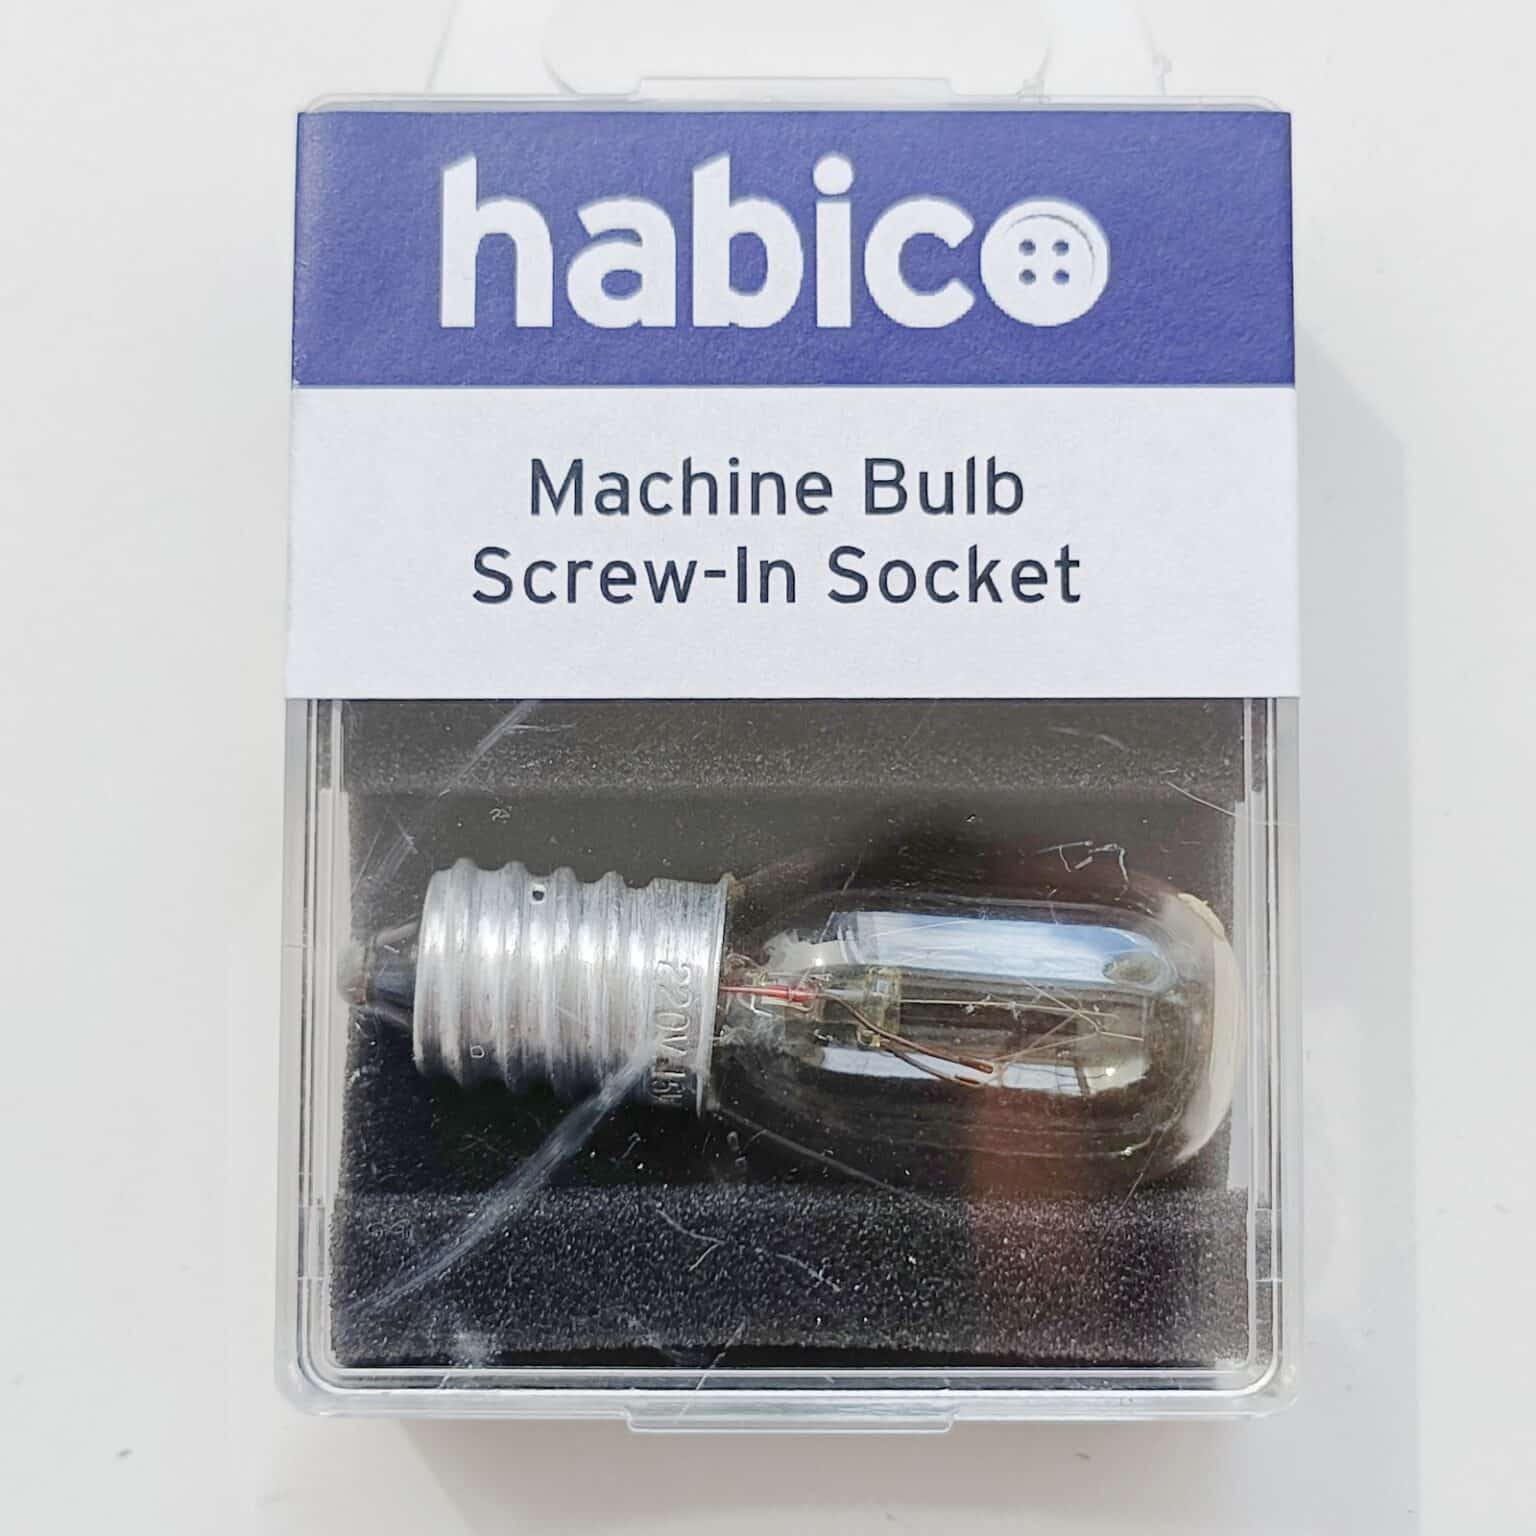 Habico Sewing Machine Light Bulb Screw In 240v 15w | More Sewing